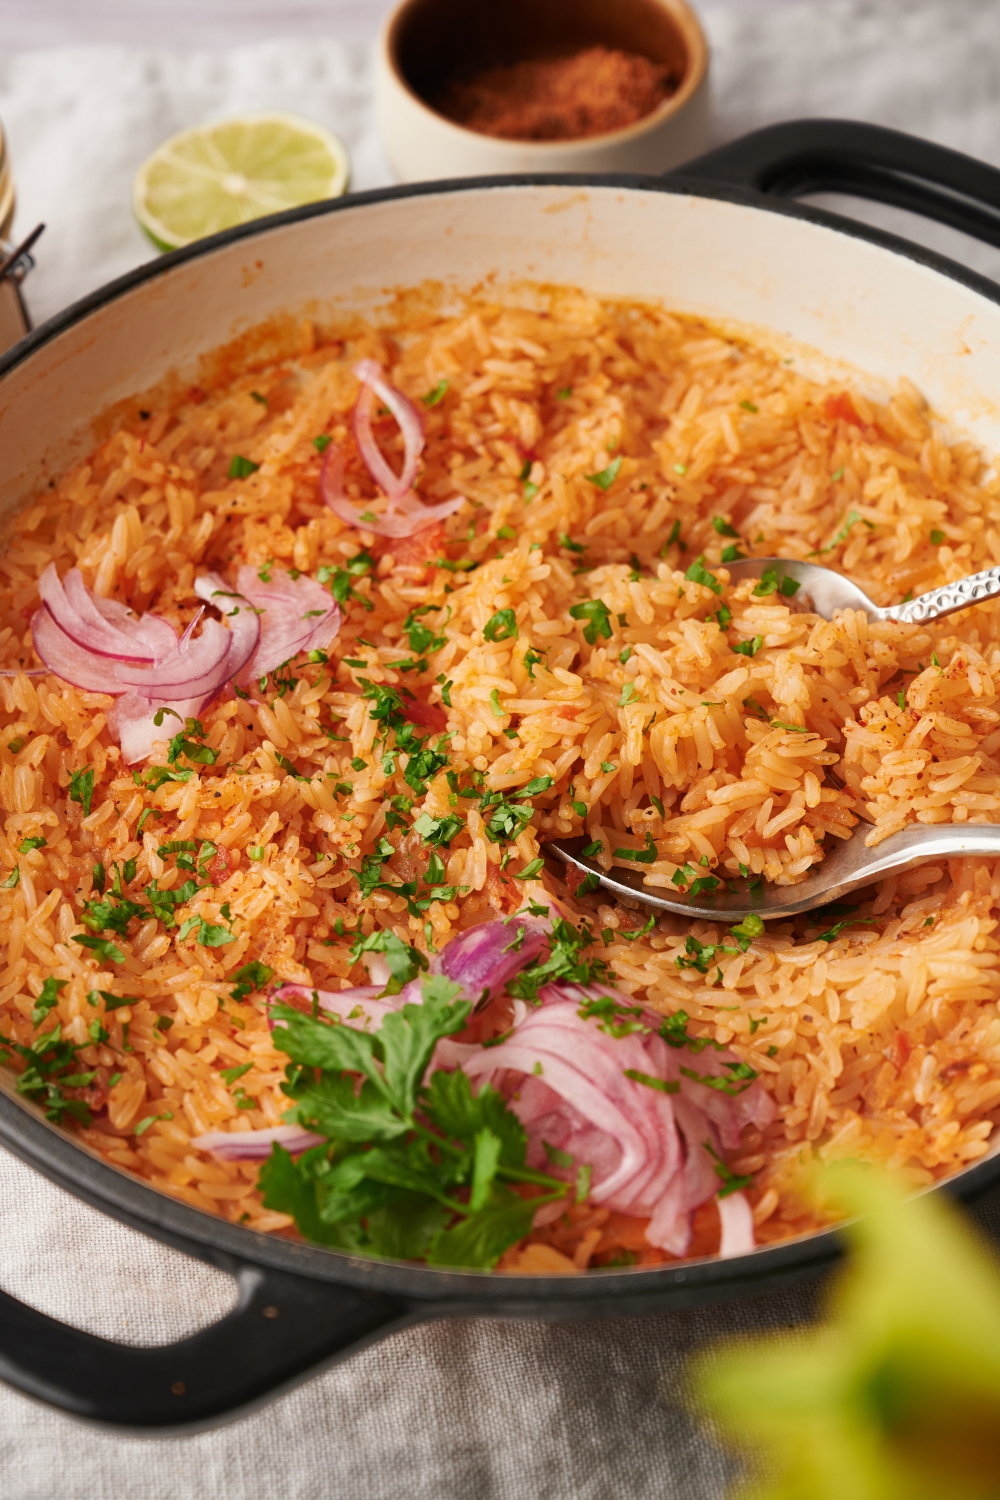 A large white pot is full of arroz rojo. Serving utensils are resting in the pot. Red onion and cilantro are garnishing the dish.